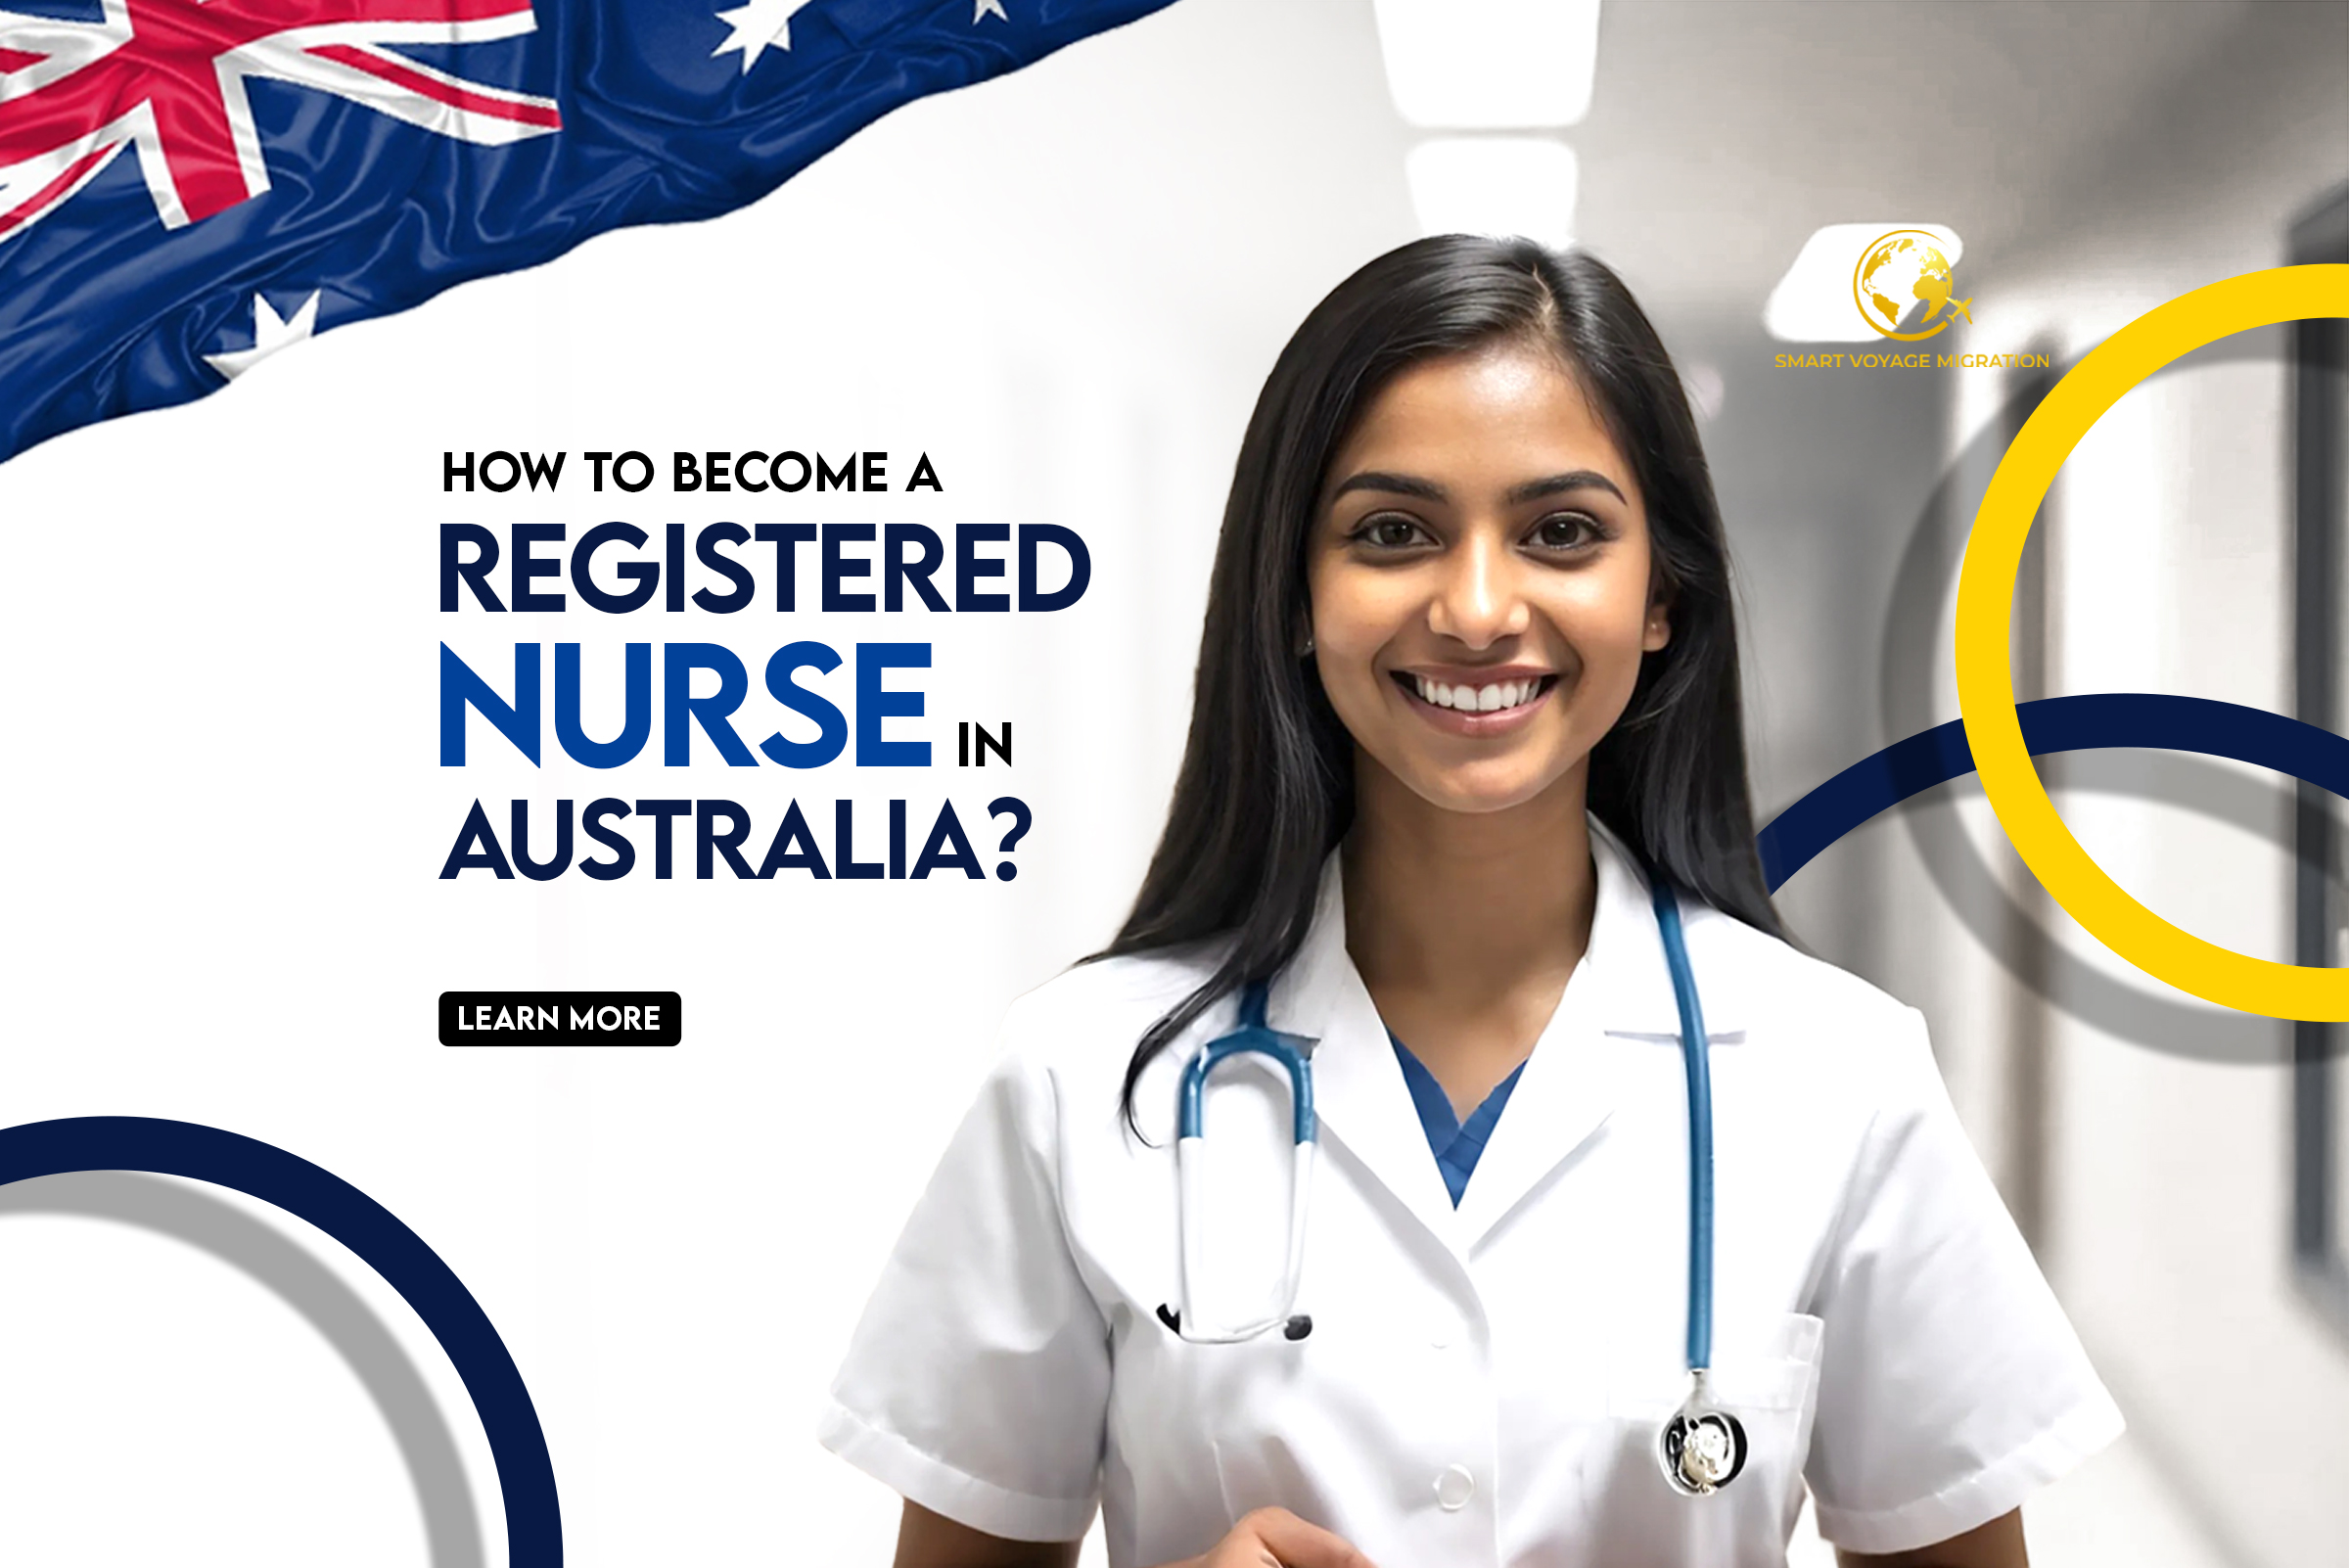 Your Path to Pursuing a Nursing Career in Australia: How to Become a Registered Nurse”